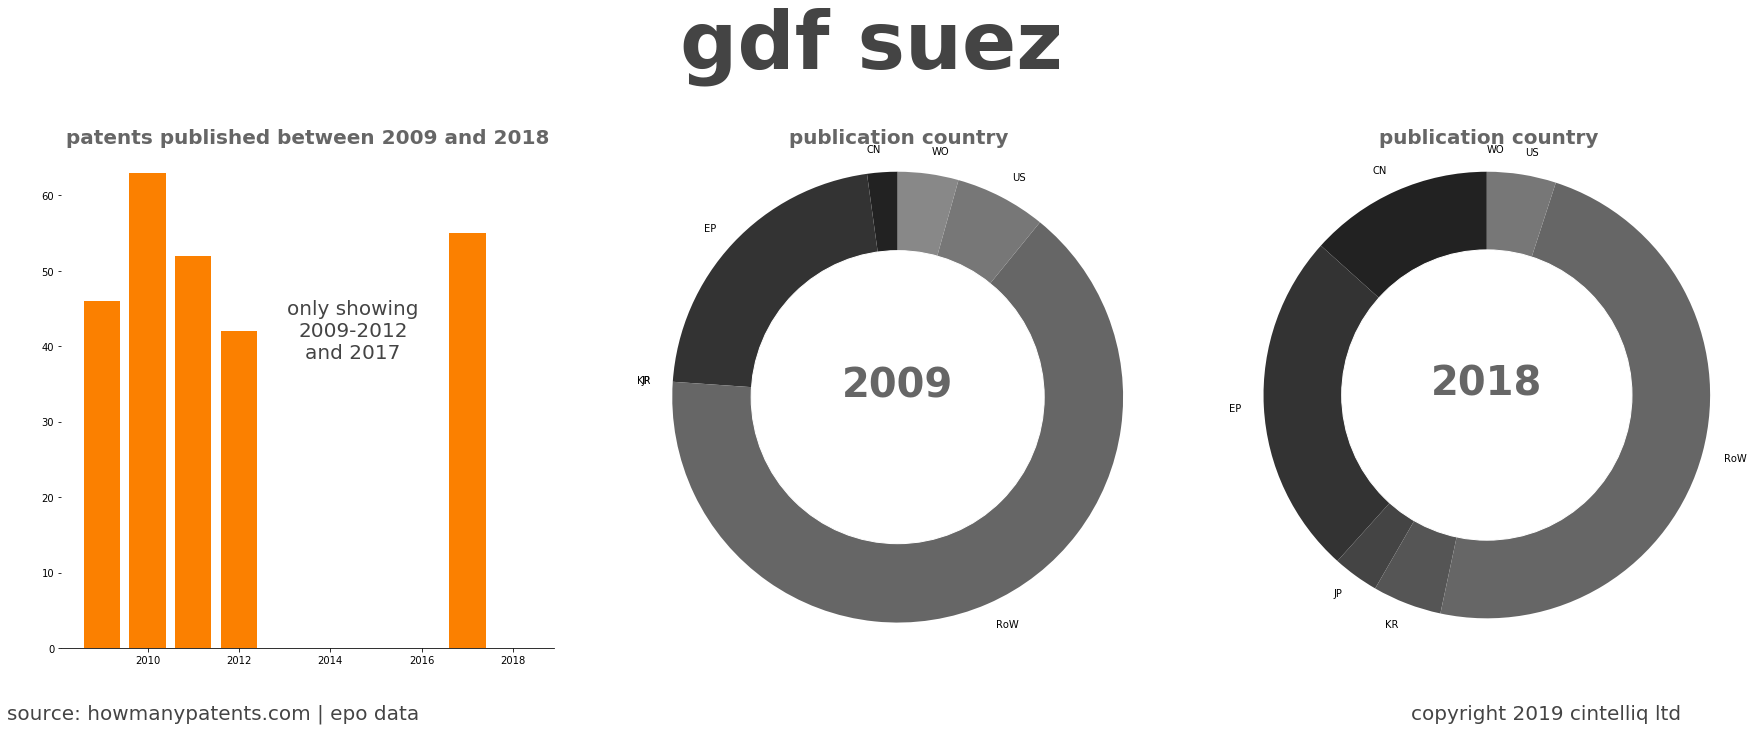 summary of patents for Gdf Suez